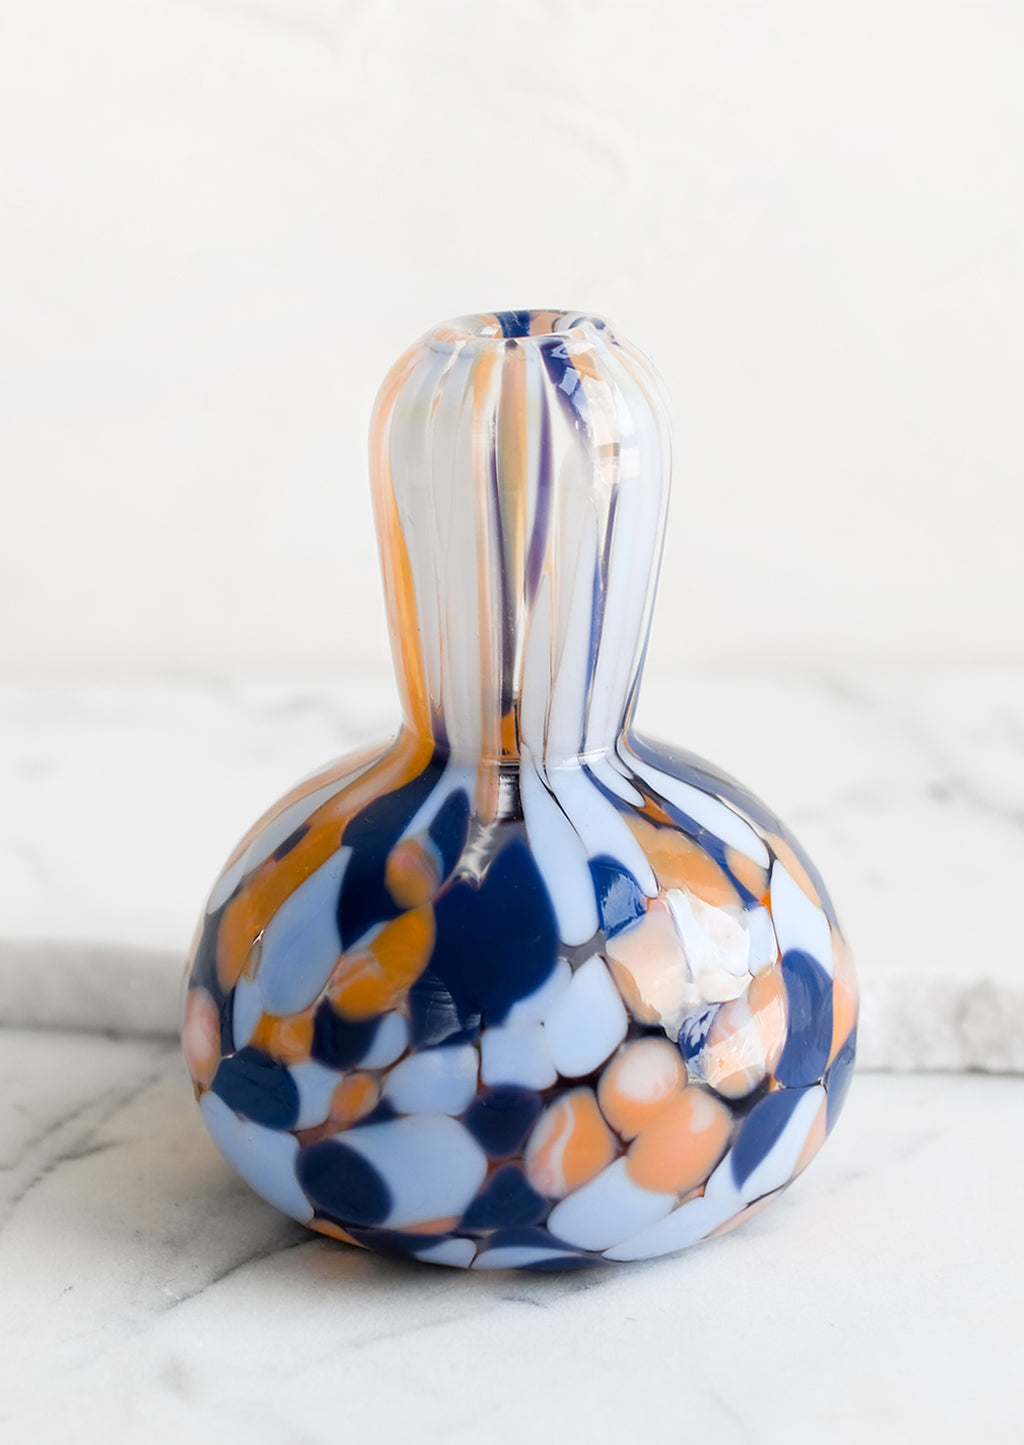 Gourd: A gourd shaped bud vase in hand blown glass with blue and orange speckle pattern.